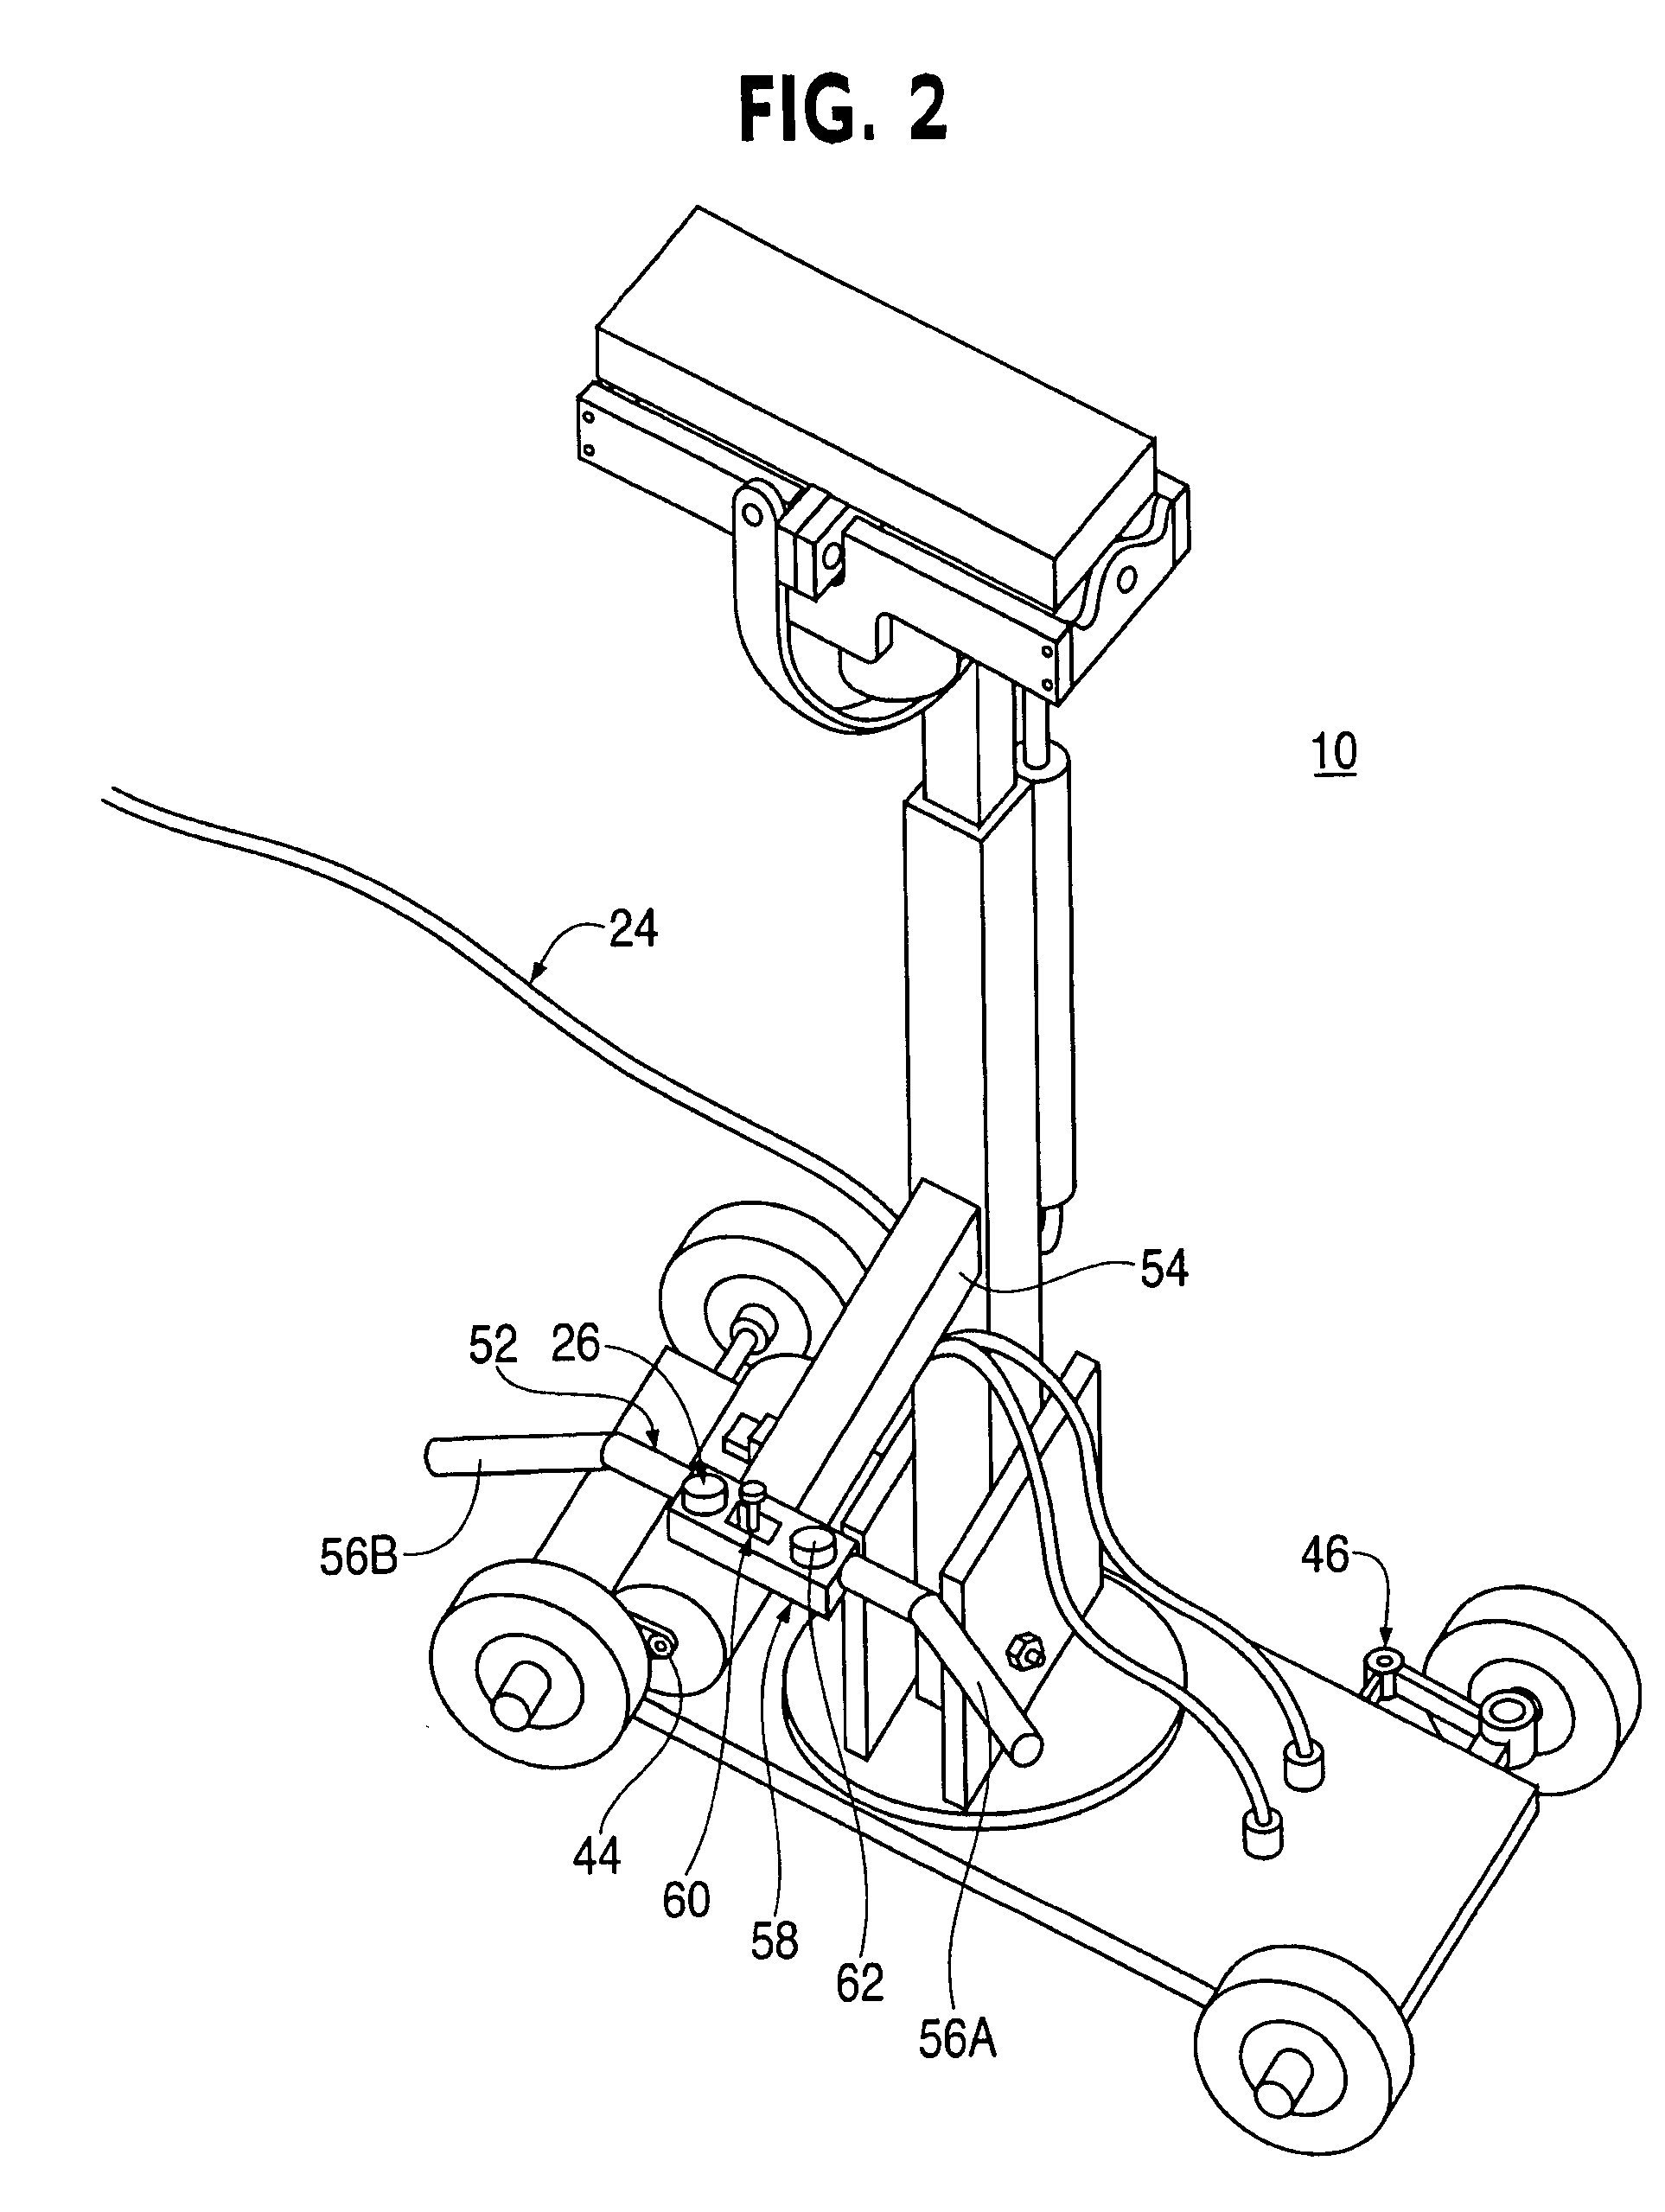 Surface preparation device and method